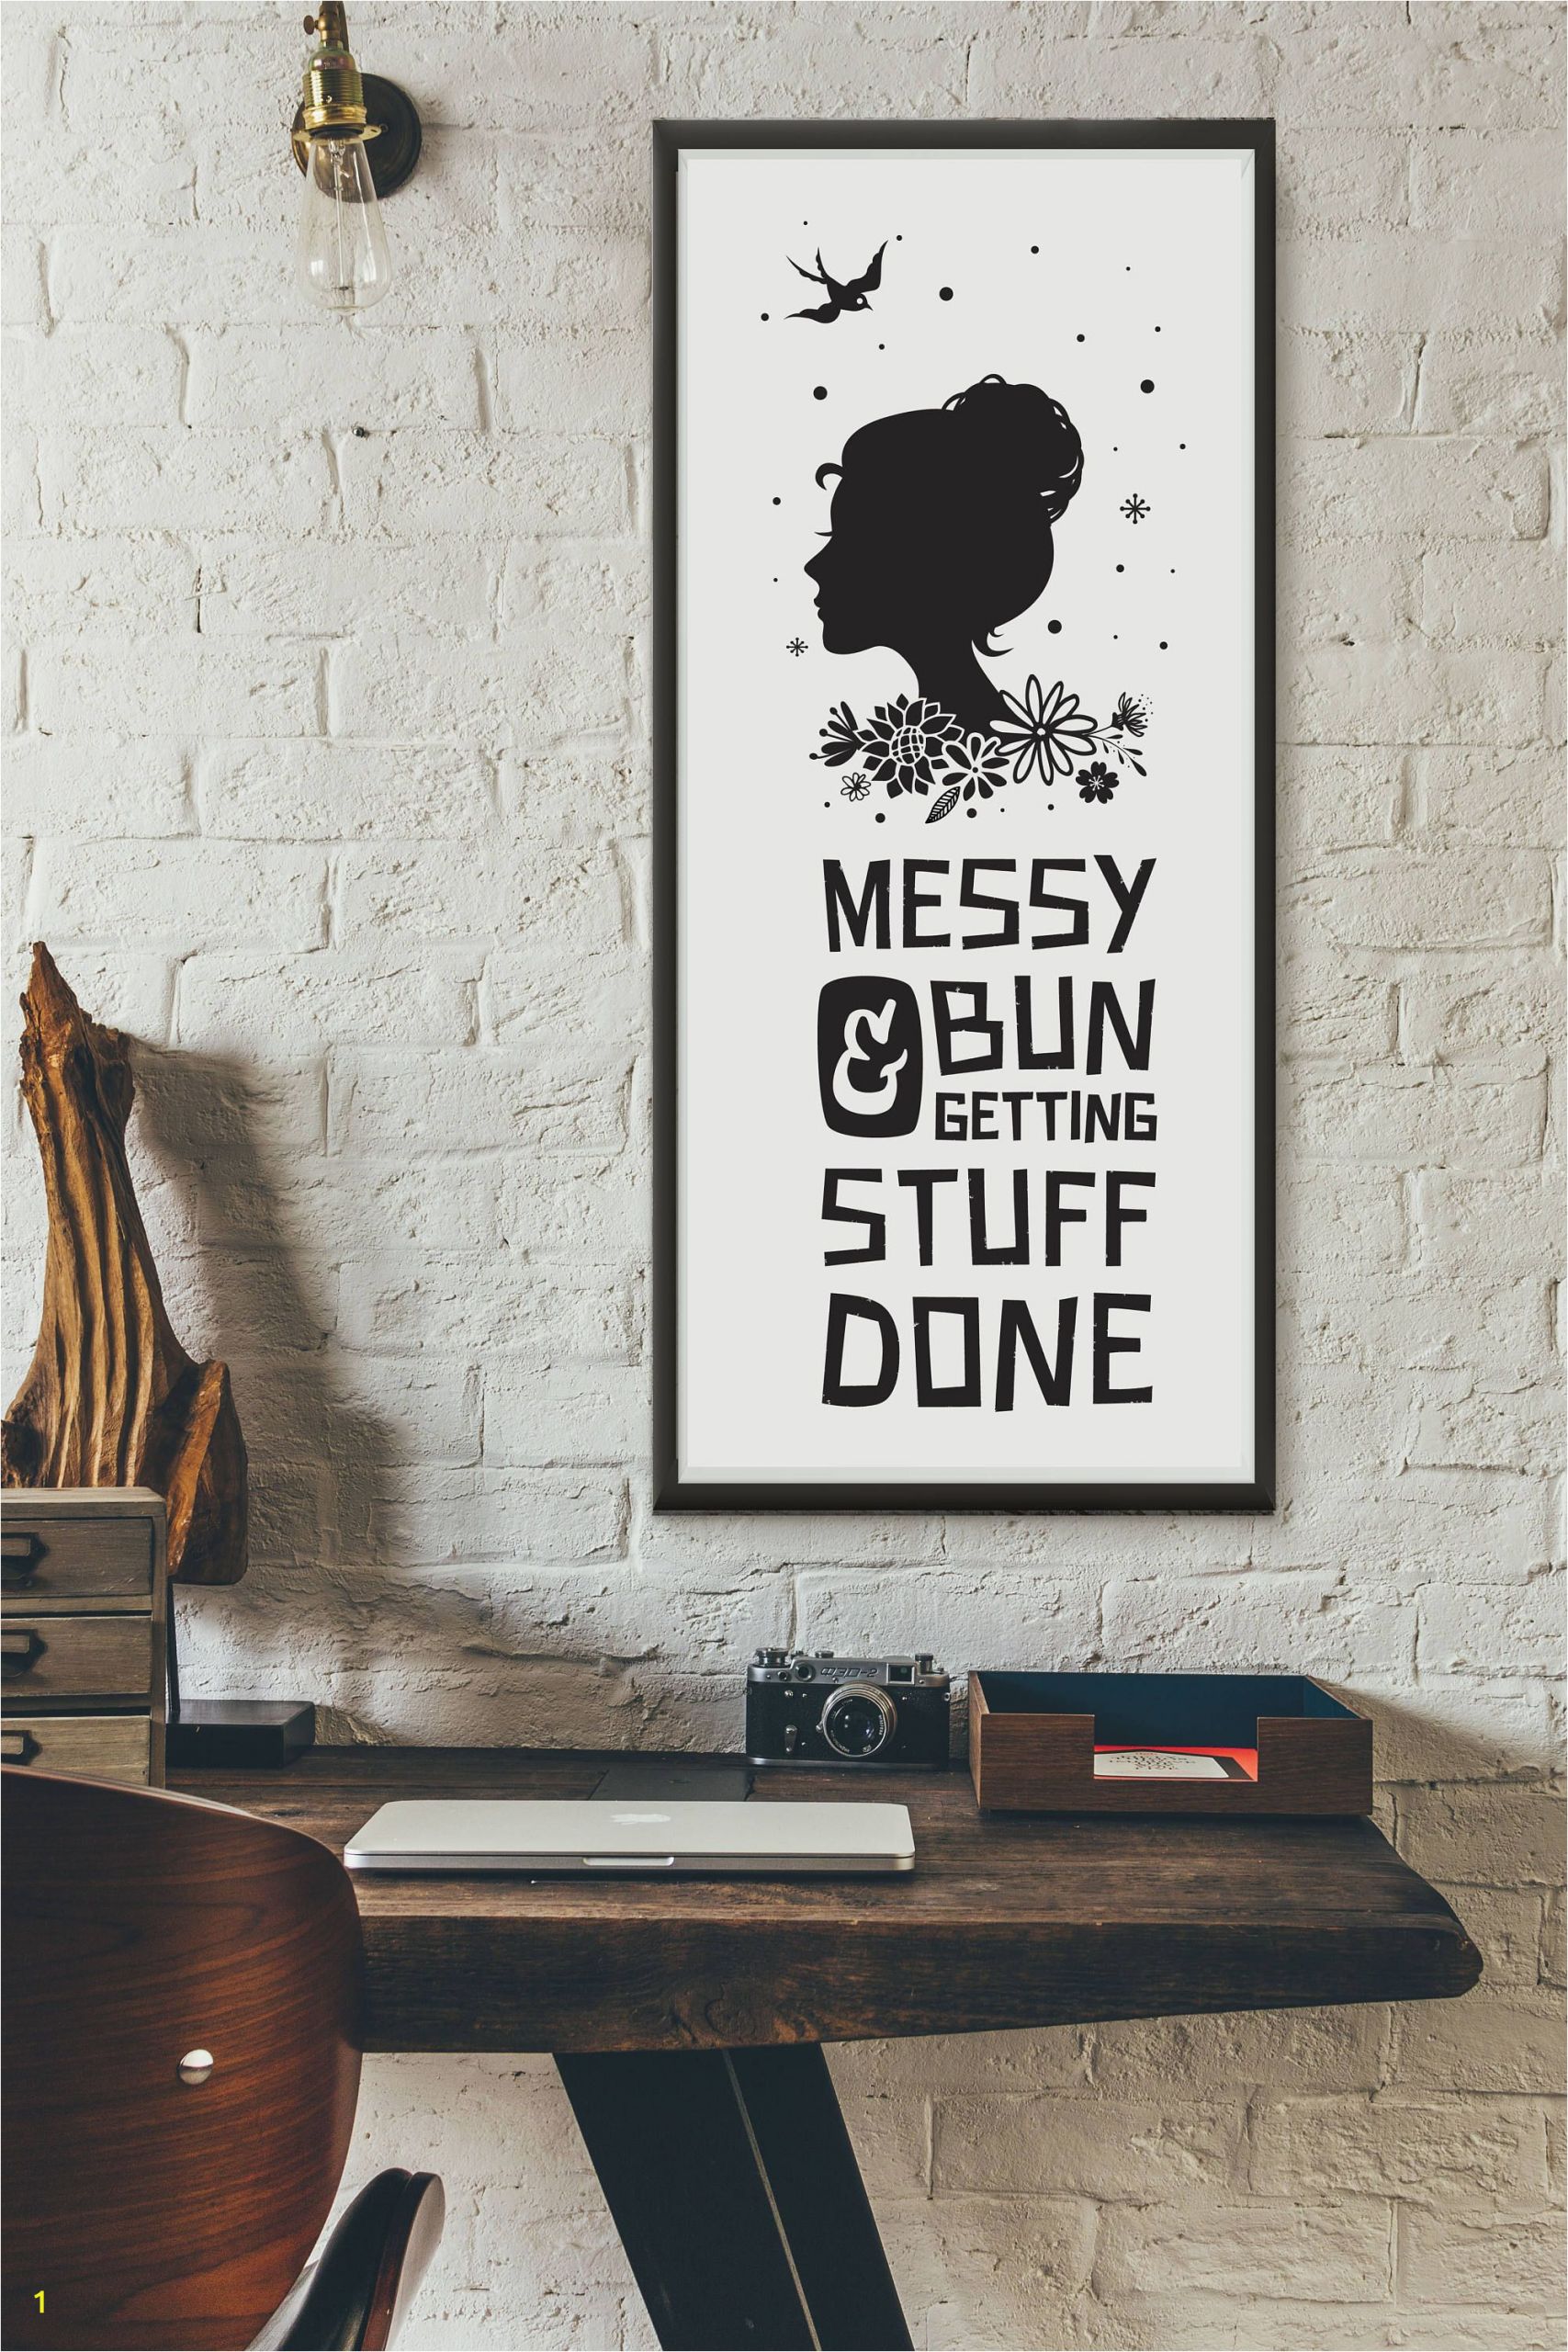 Printable Wall Murals Free Messy Bun and Getting Stuff Done Printable Quote Wall Art